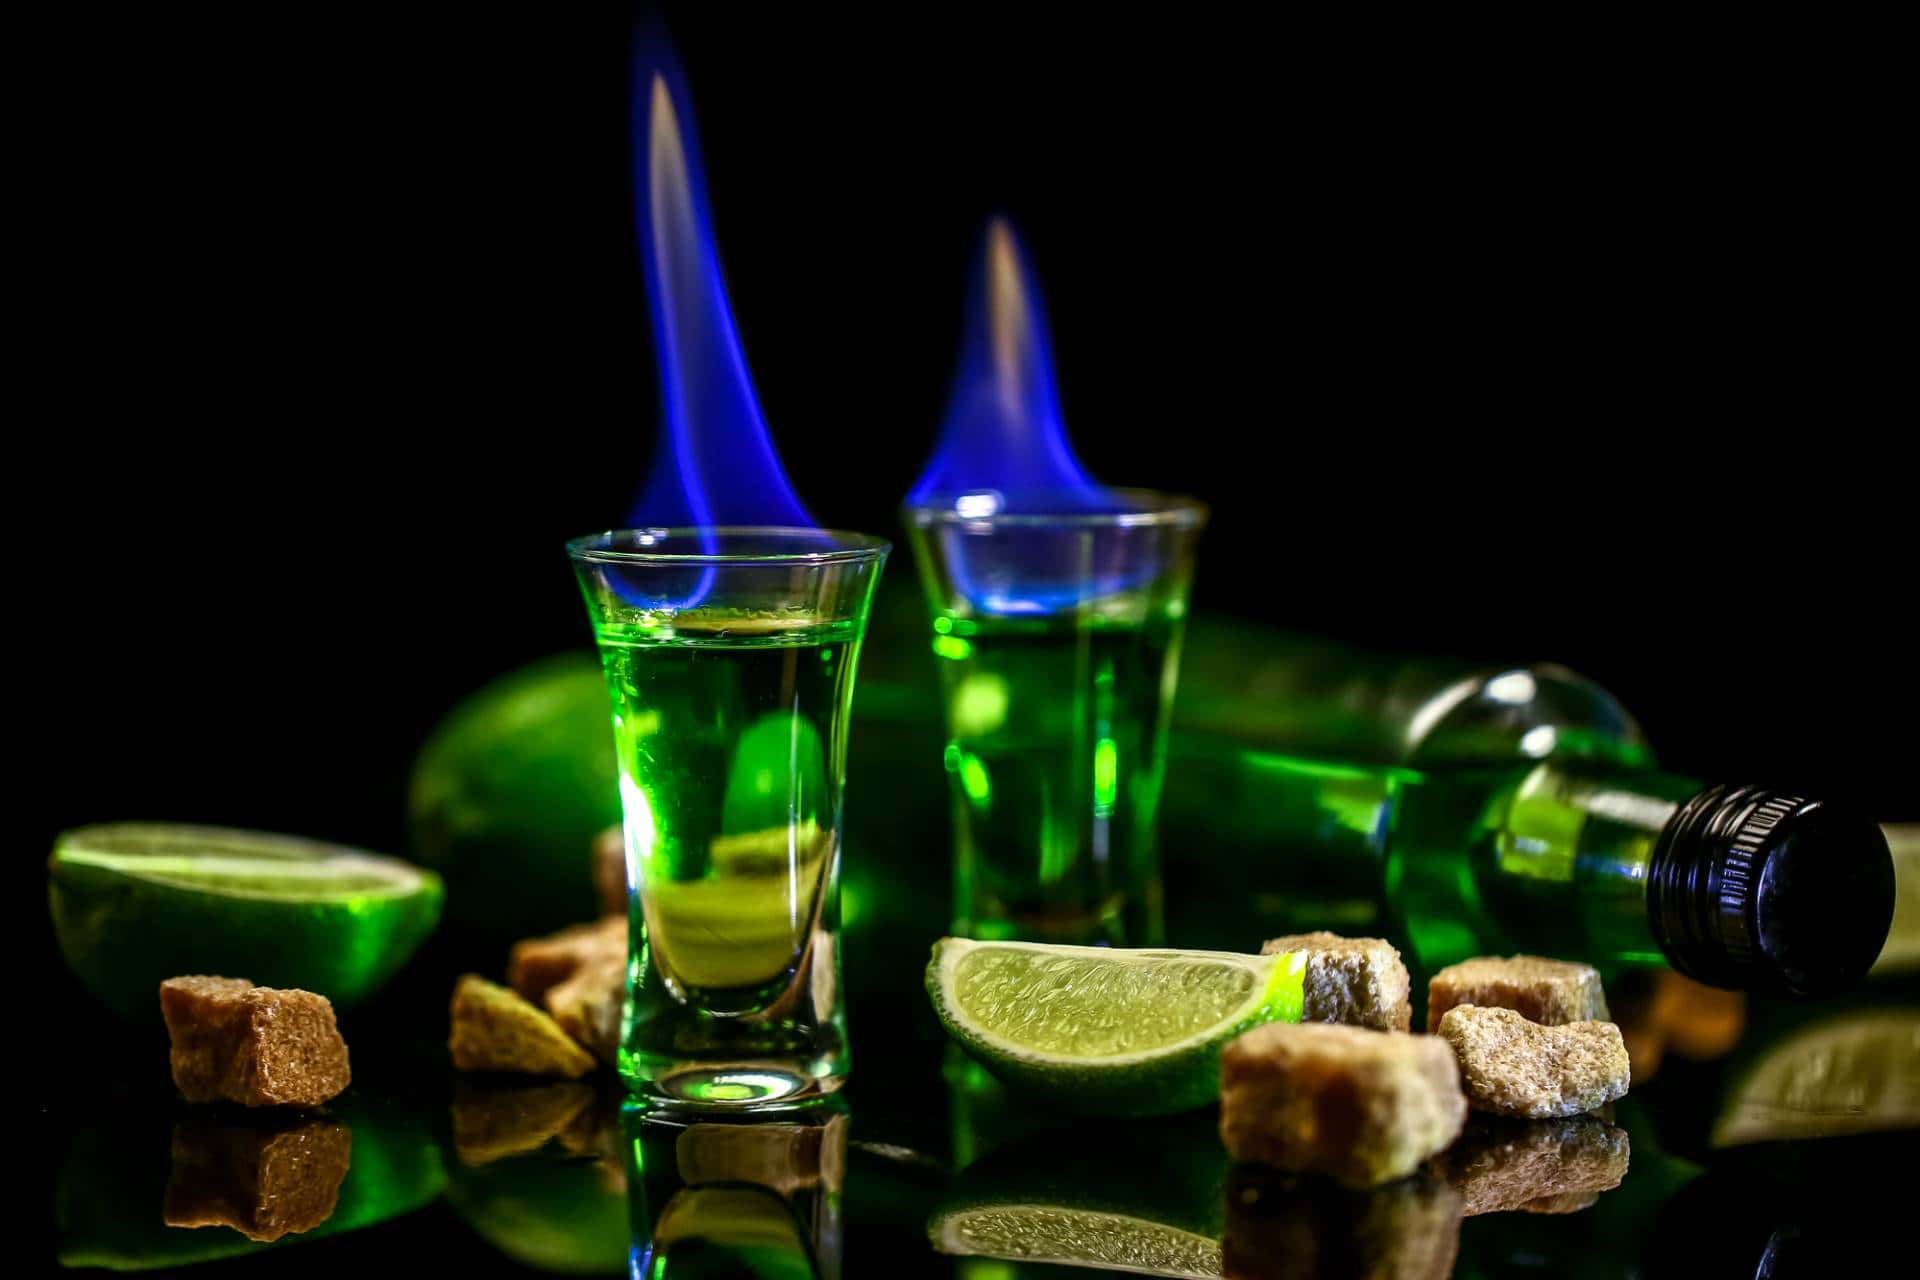 Does Absinthe really have hallucinogenic properties?